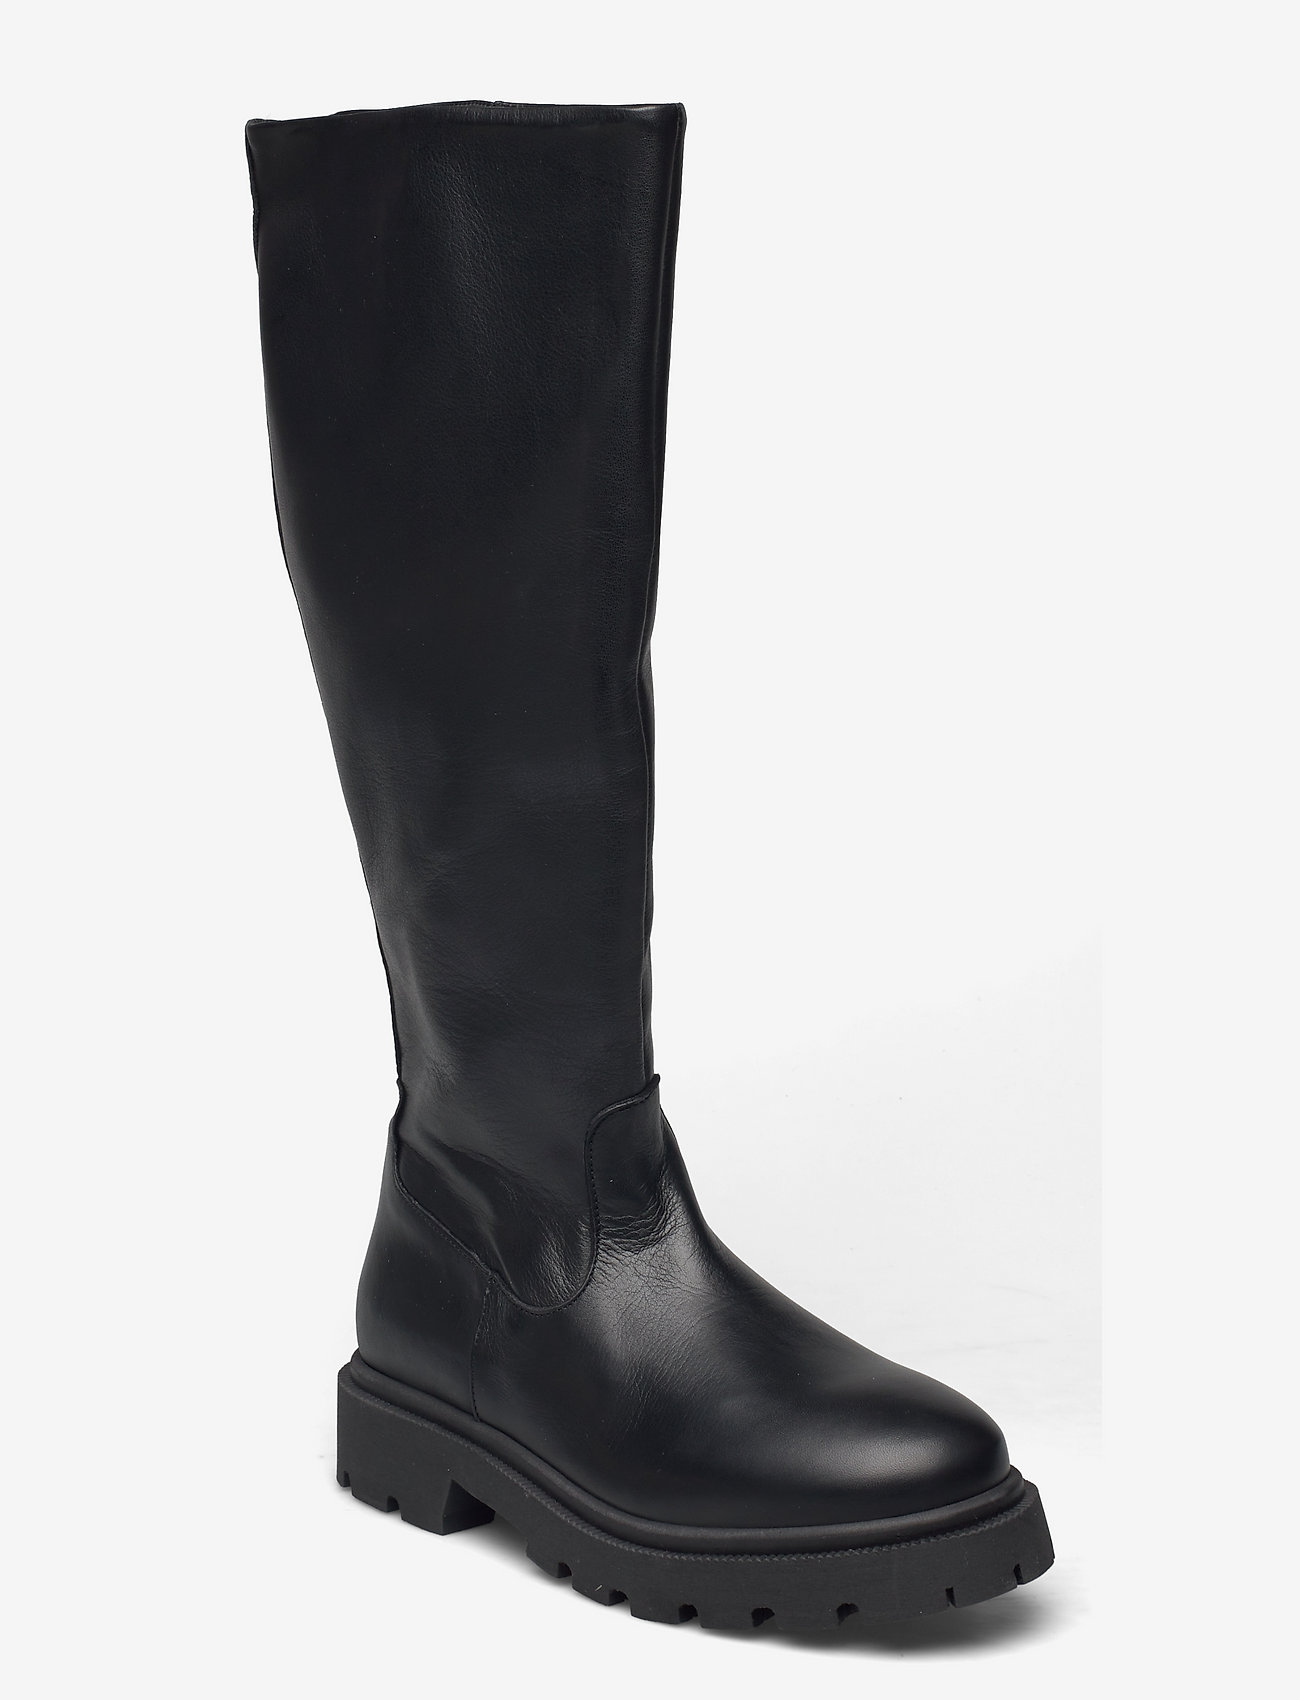 Selected Femme - SLFEMMA HIGH SHAFTED LEATHER BOOT B - knee high boots - black - 0